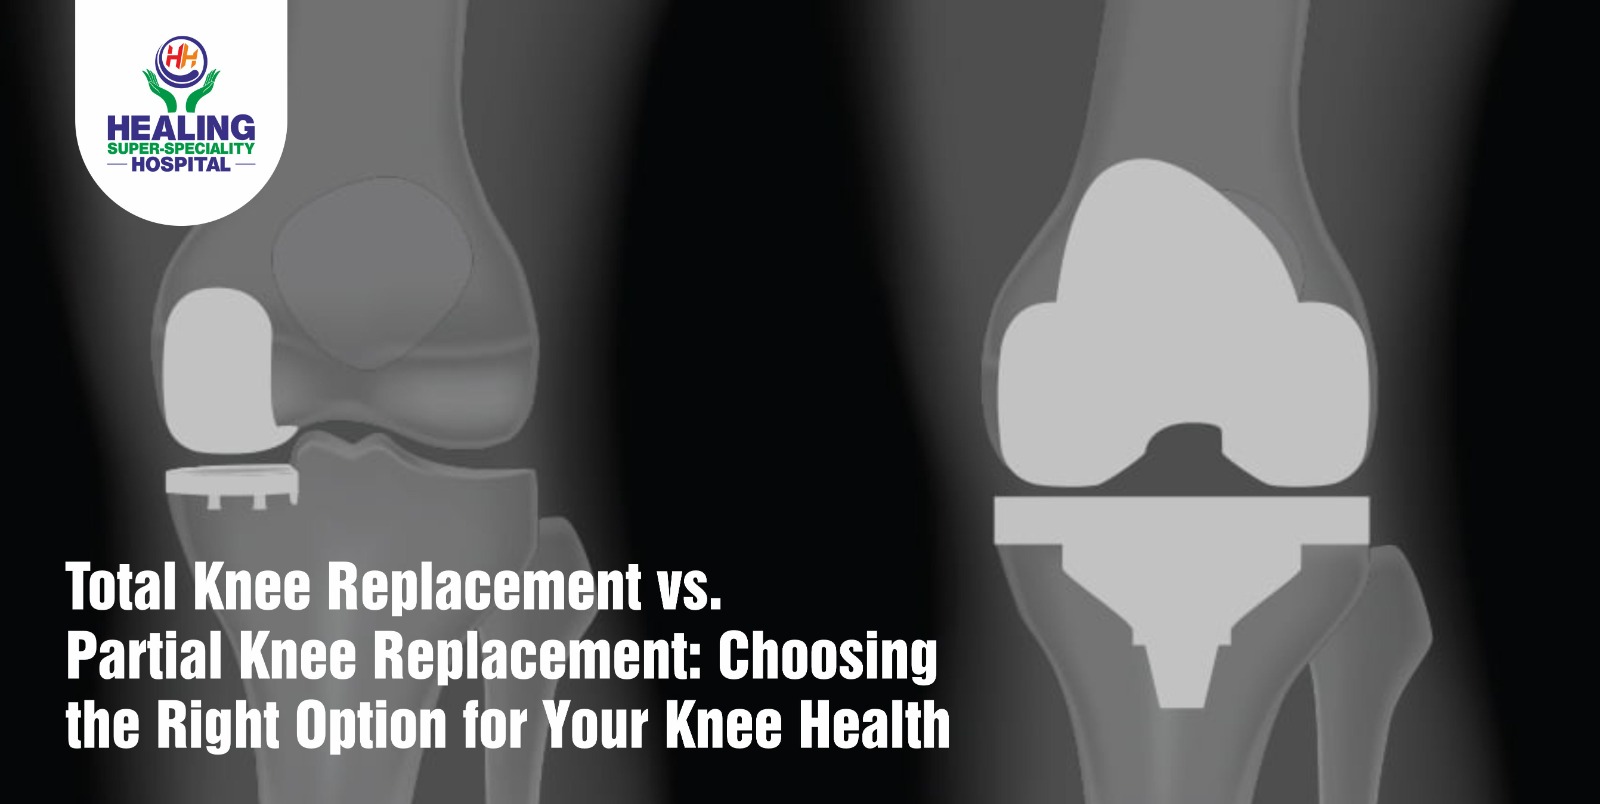 Total Knee Replacement vs. Partial Knee Replacement: Choosing the Right Option for Your Knee Health